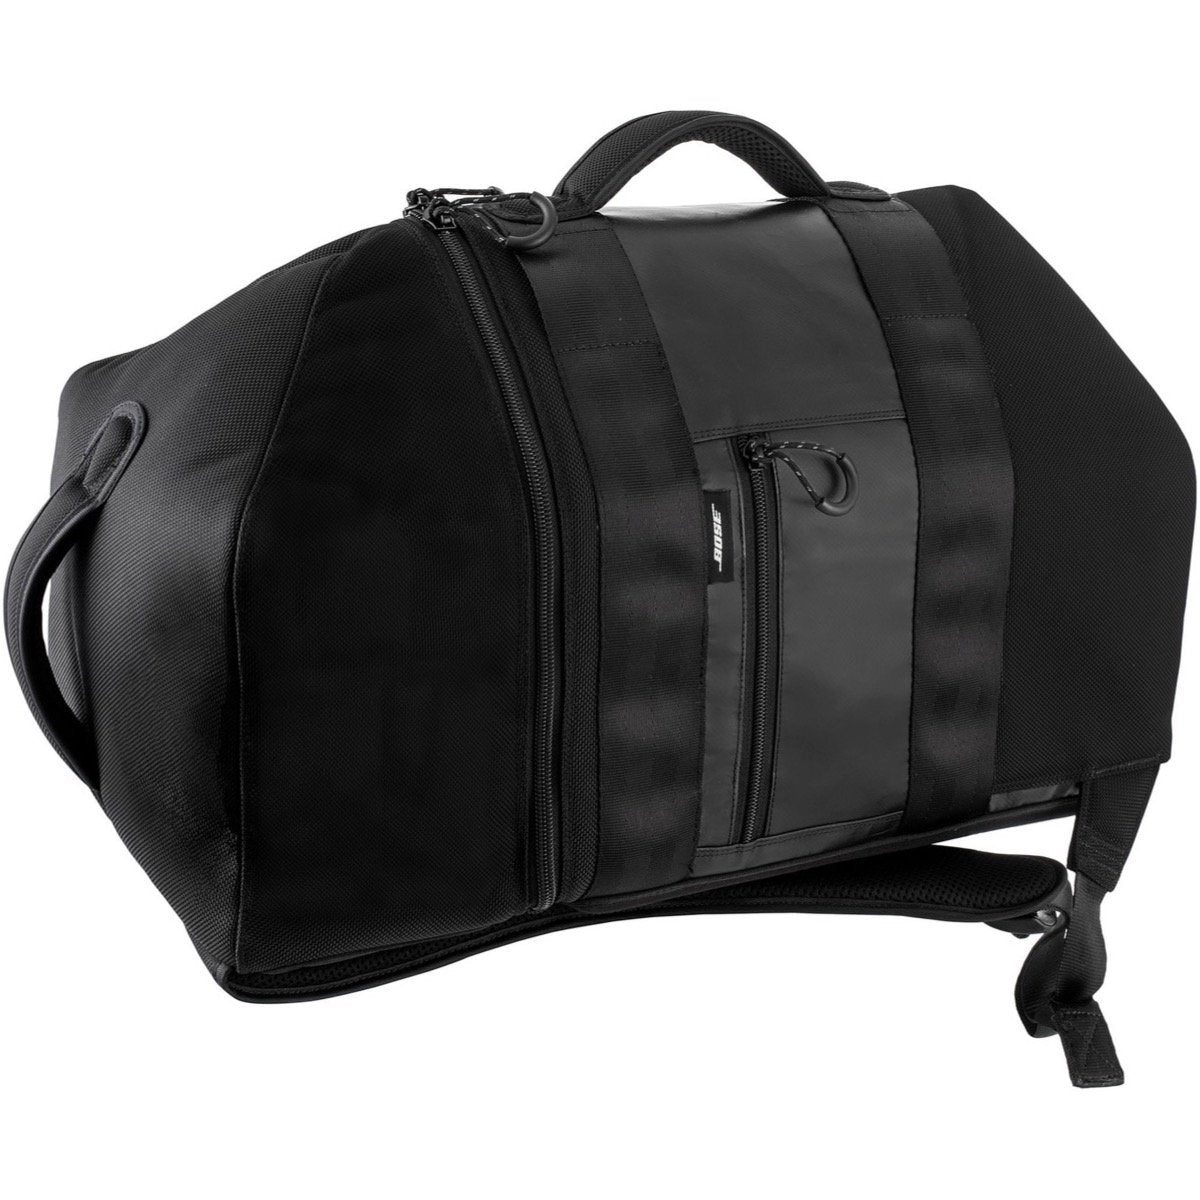 Bose S1 Pro Backpack Padded Carrying Case